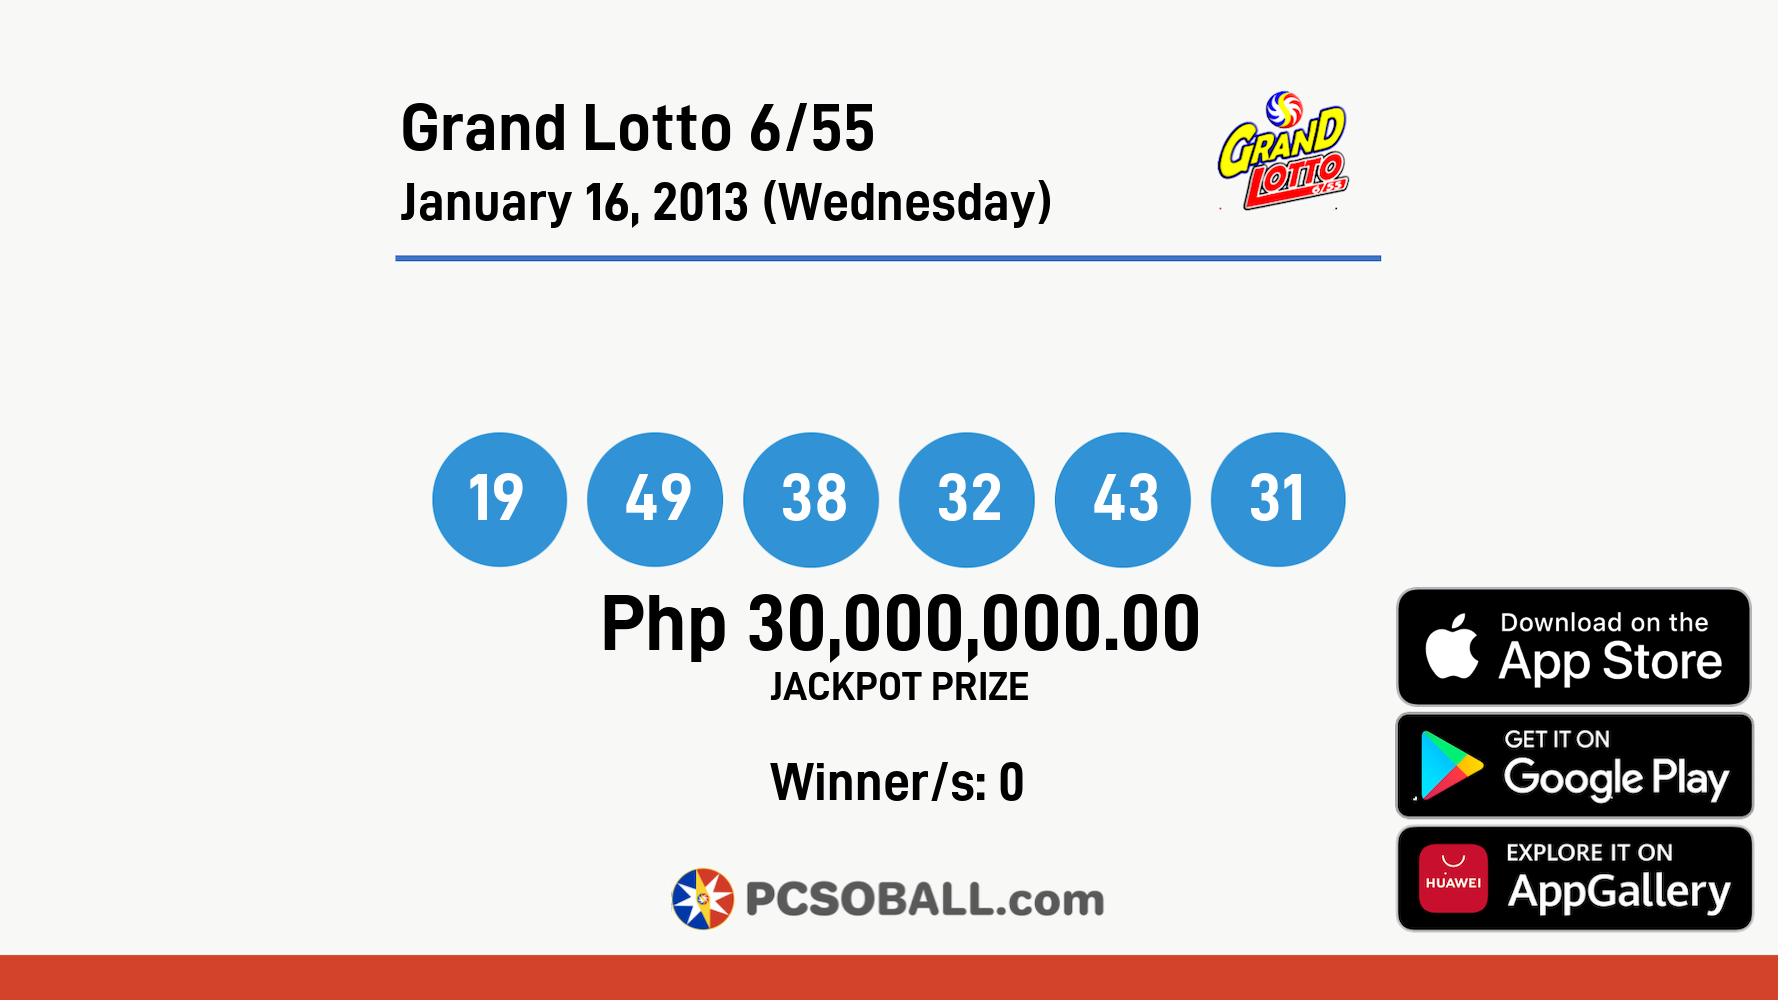 Grand Lotto 6/55 January 16, 2013 (Wednesday) Result